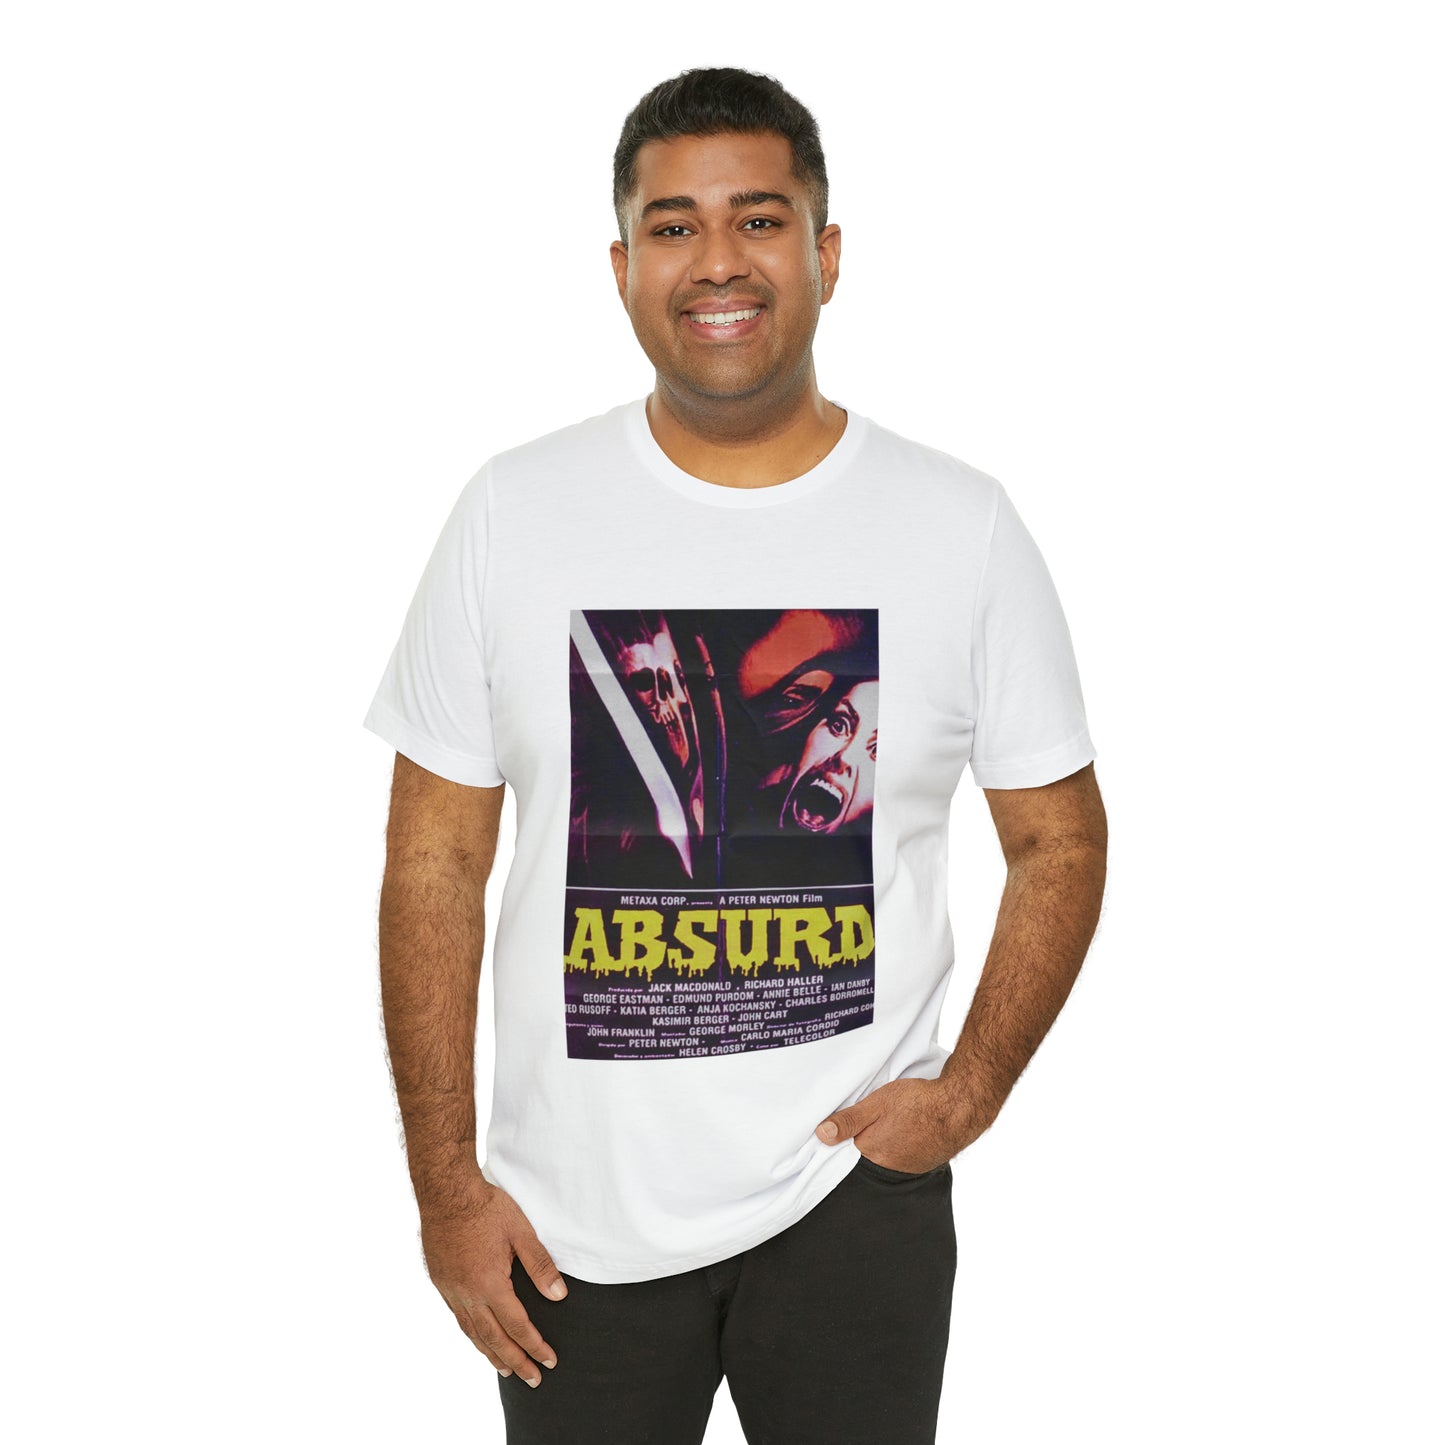 Absurd T-Shirt - Video Nasties Collection